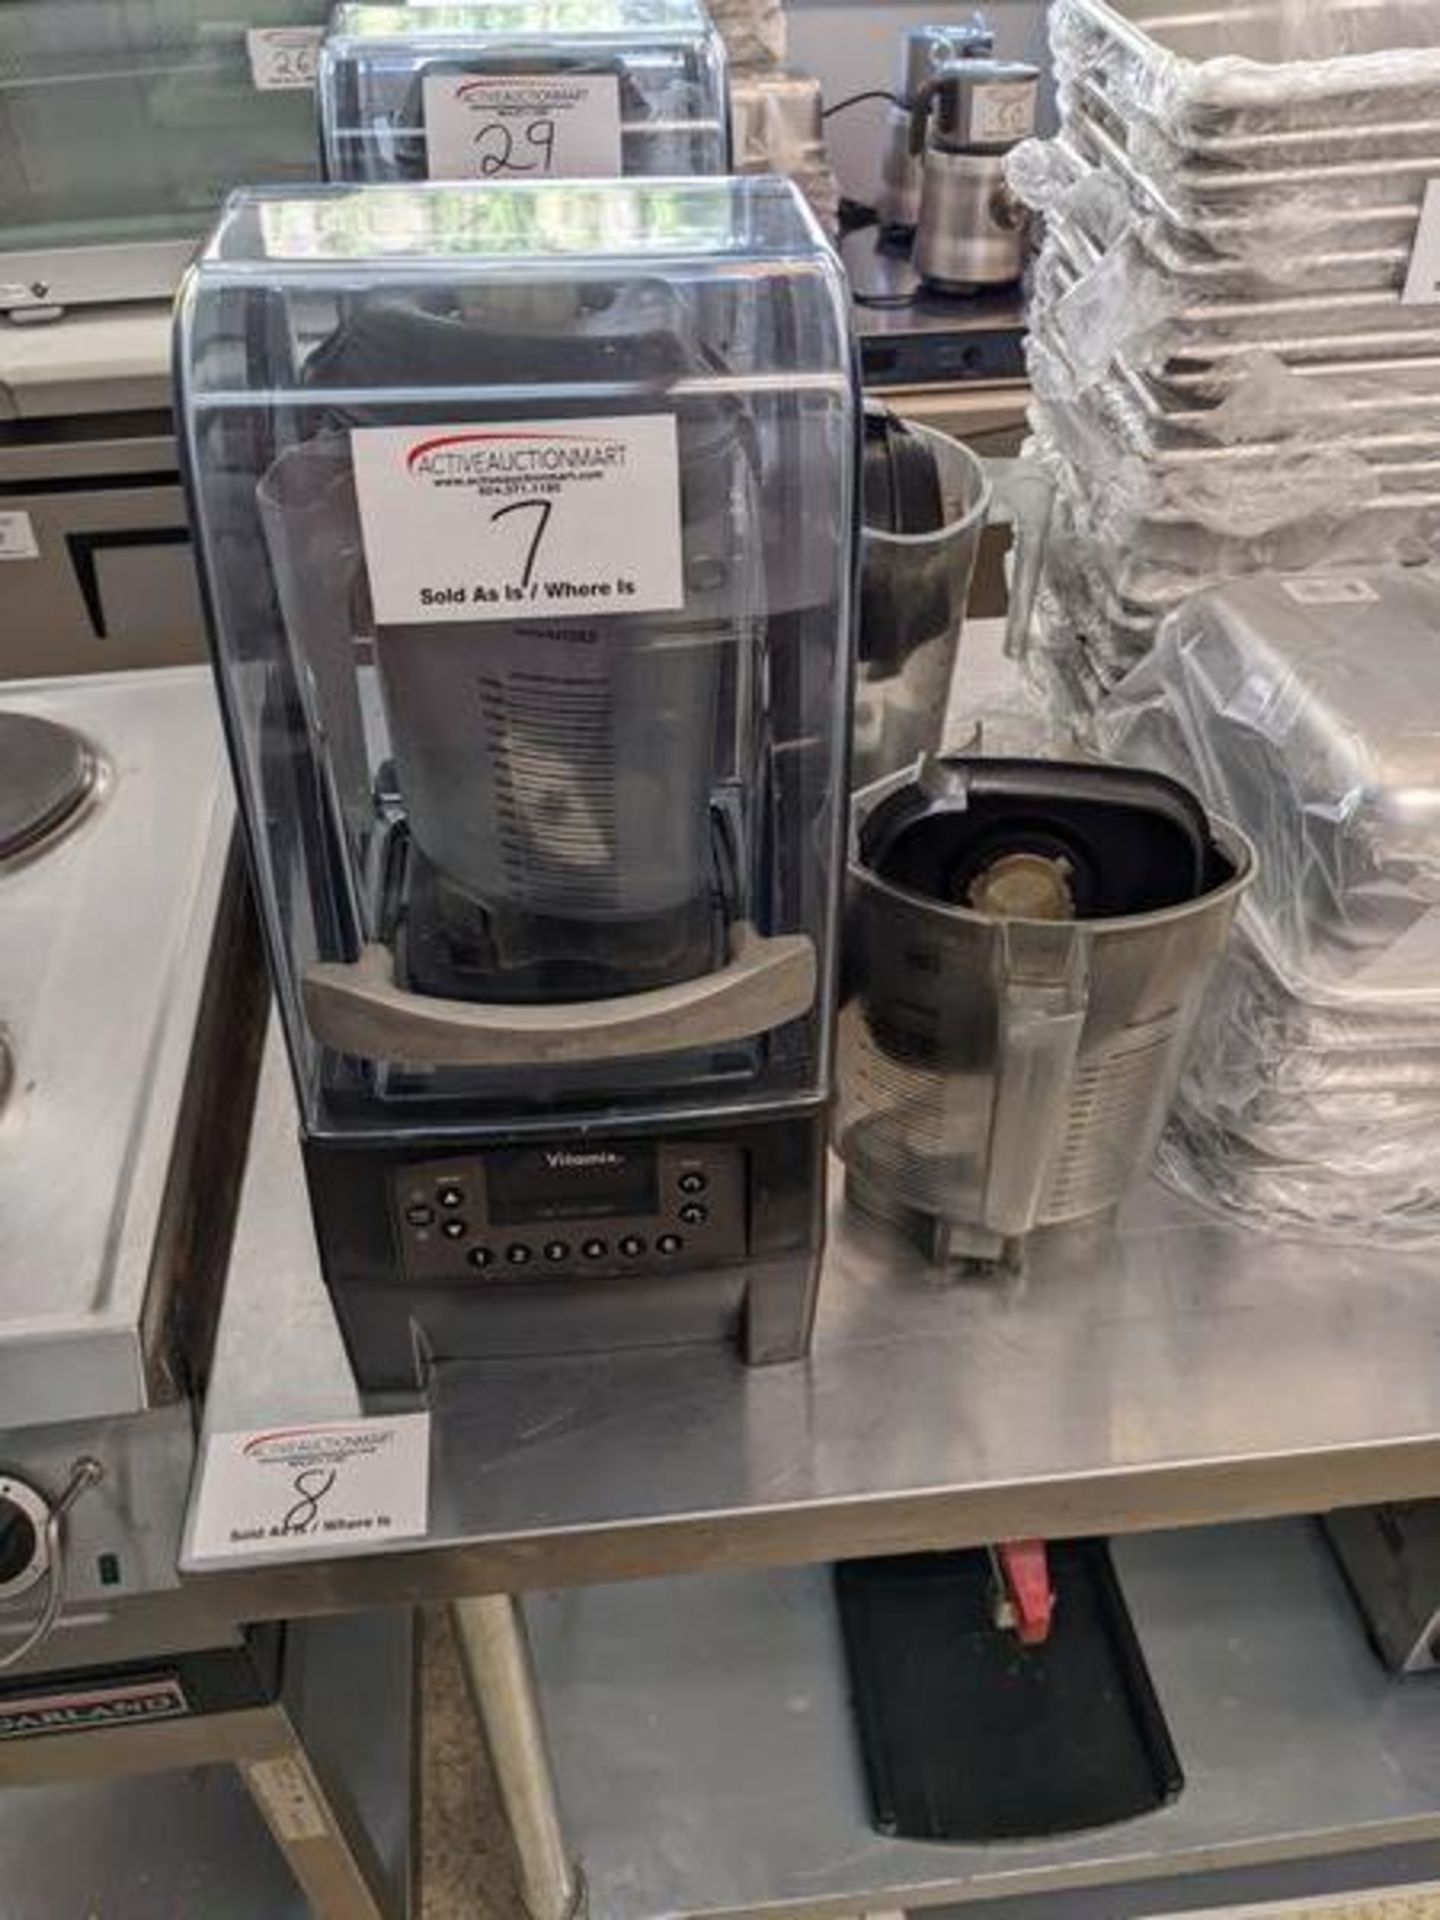 Vitamix Blender with 2 Jugs - Note new in 2019 - Original Cost $ 1985.00